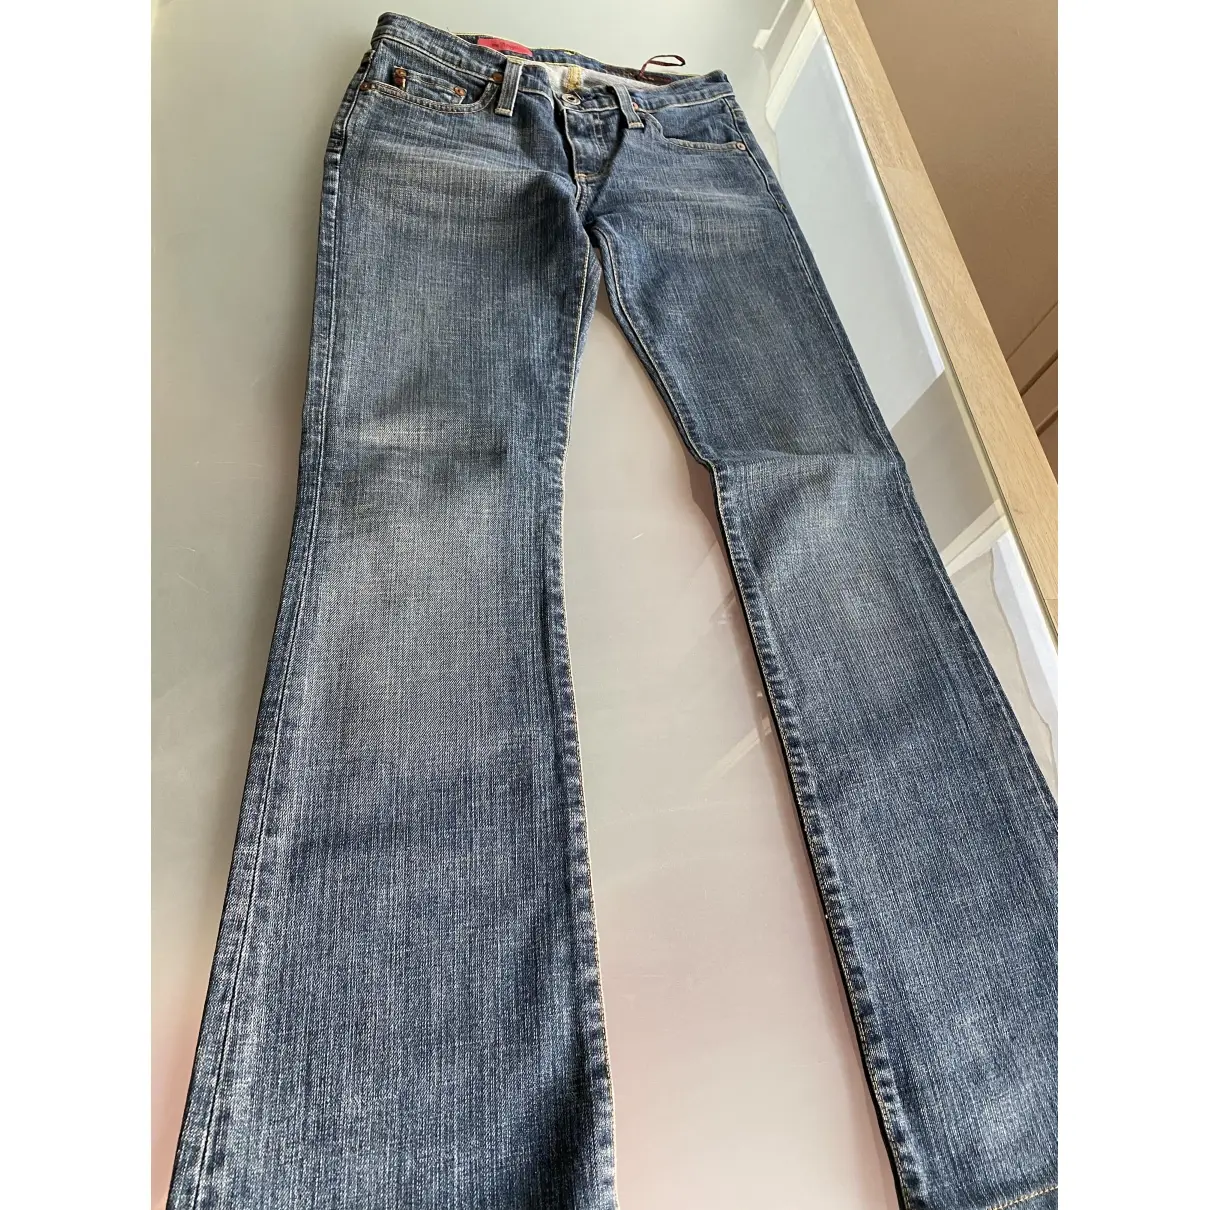 Ag Adriano Goldschmied Bootcut jeans for sale